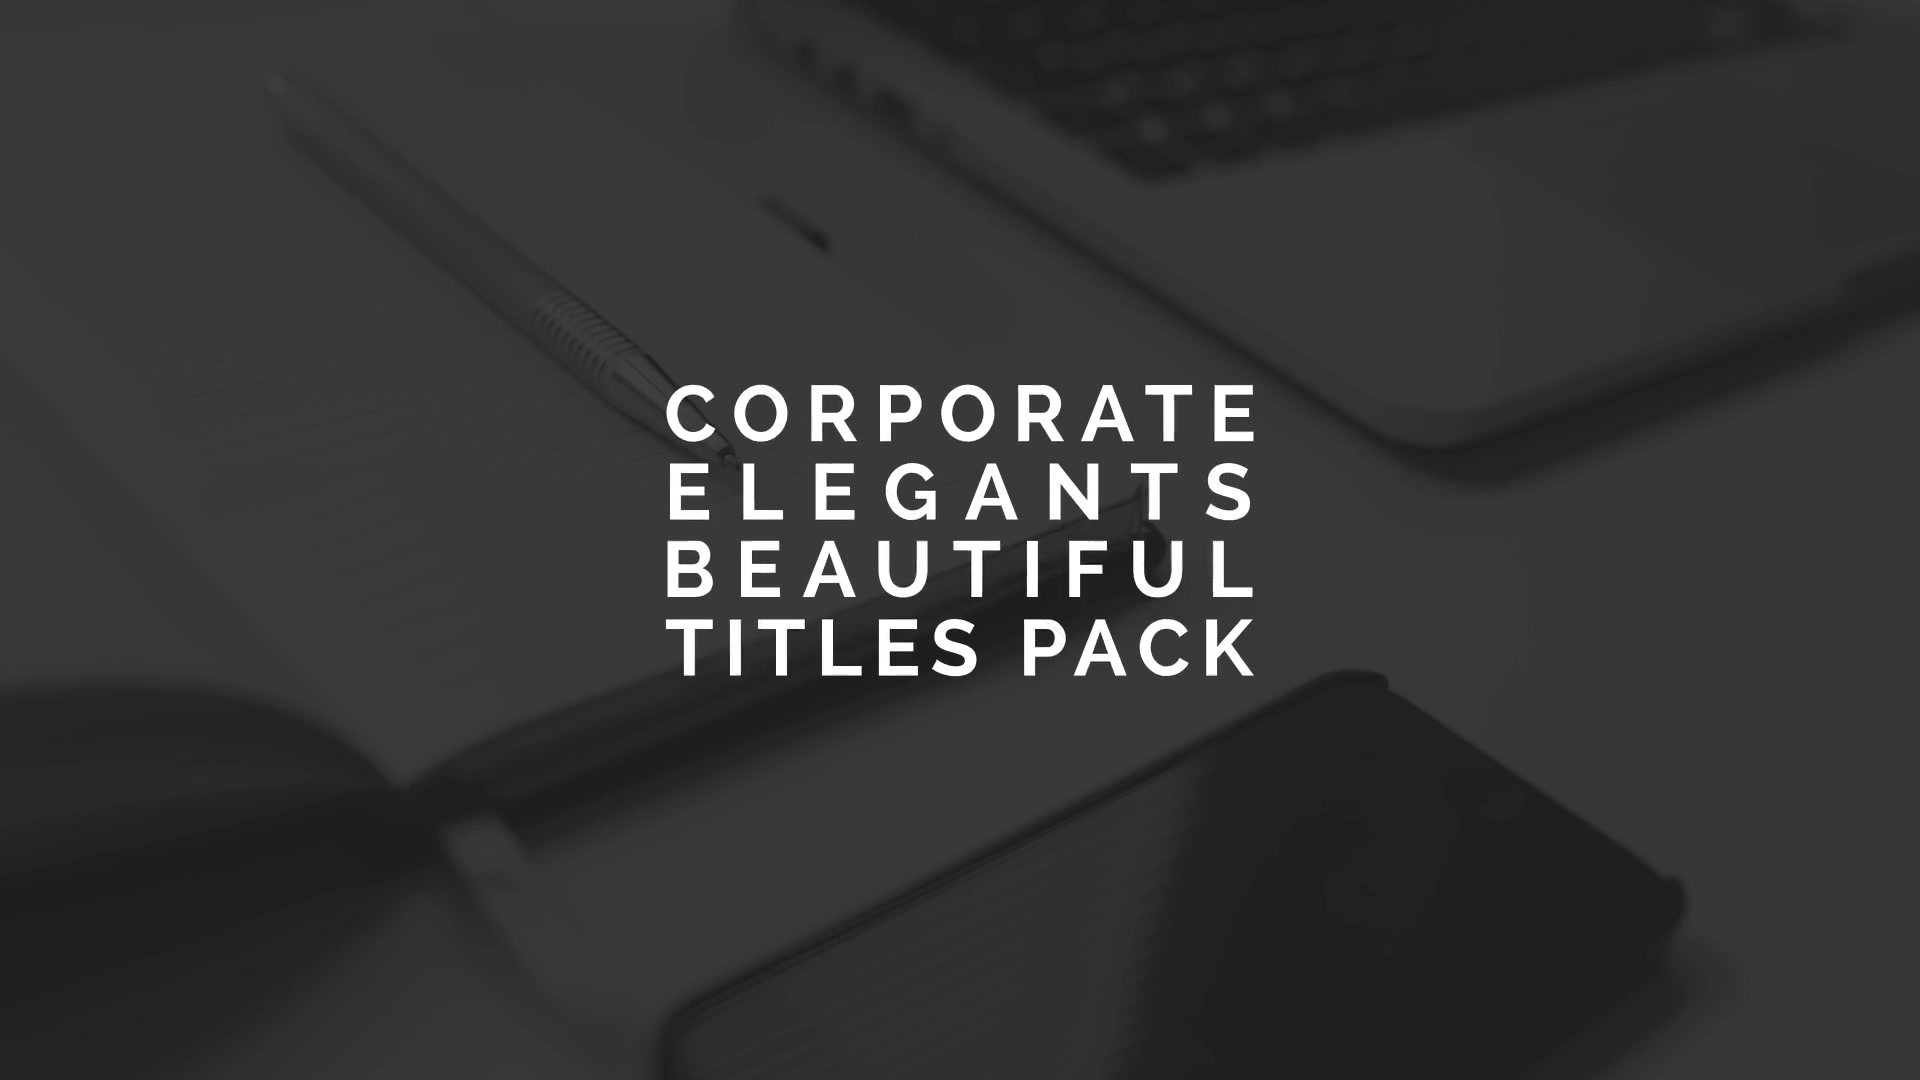 Corporate Titles - Download Videohive 19307849